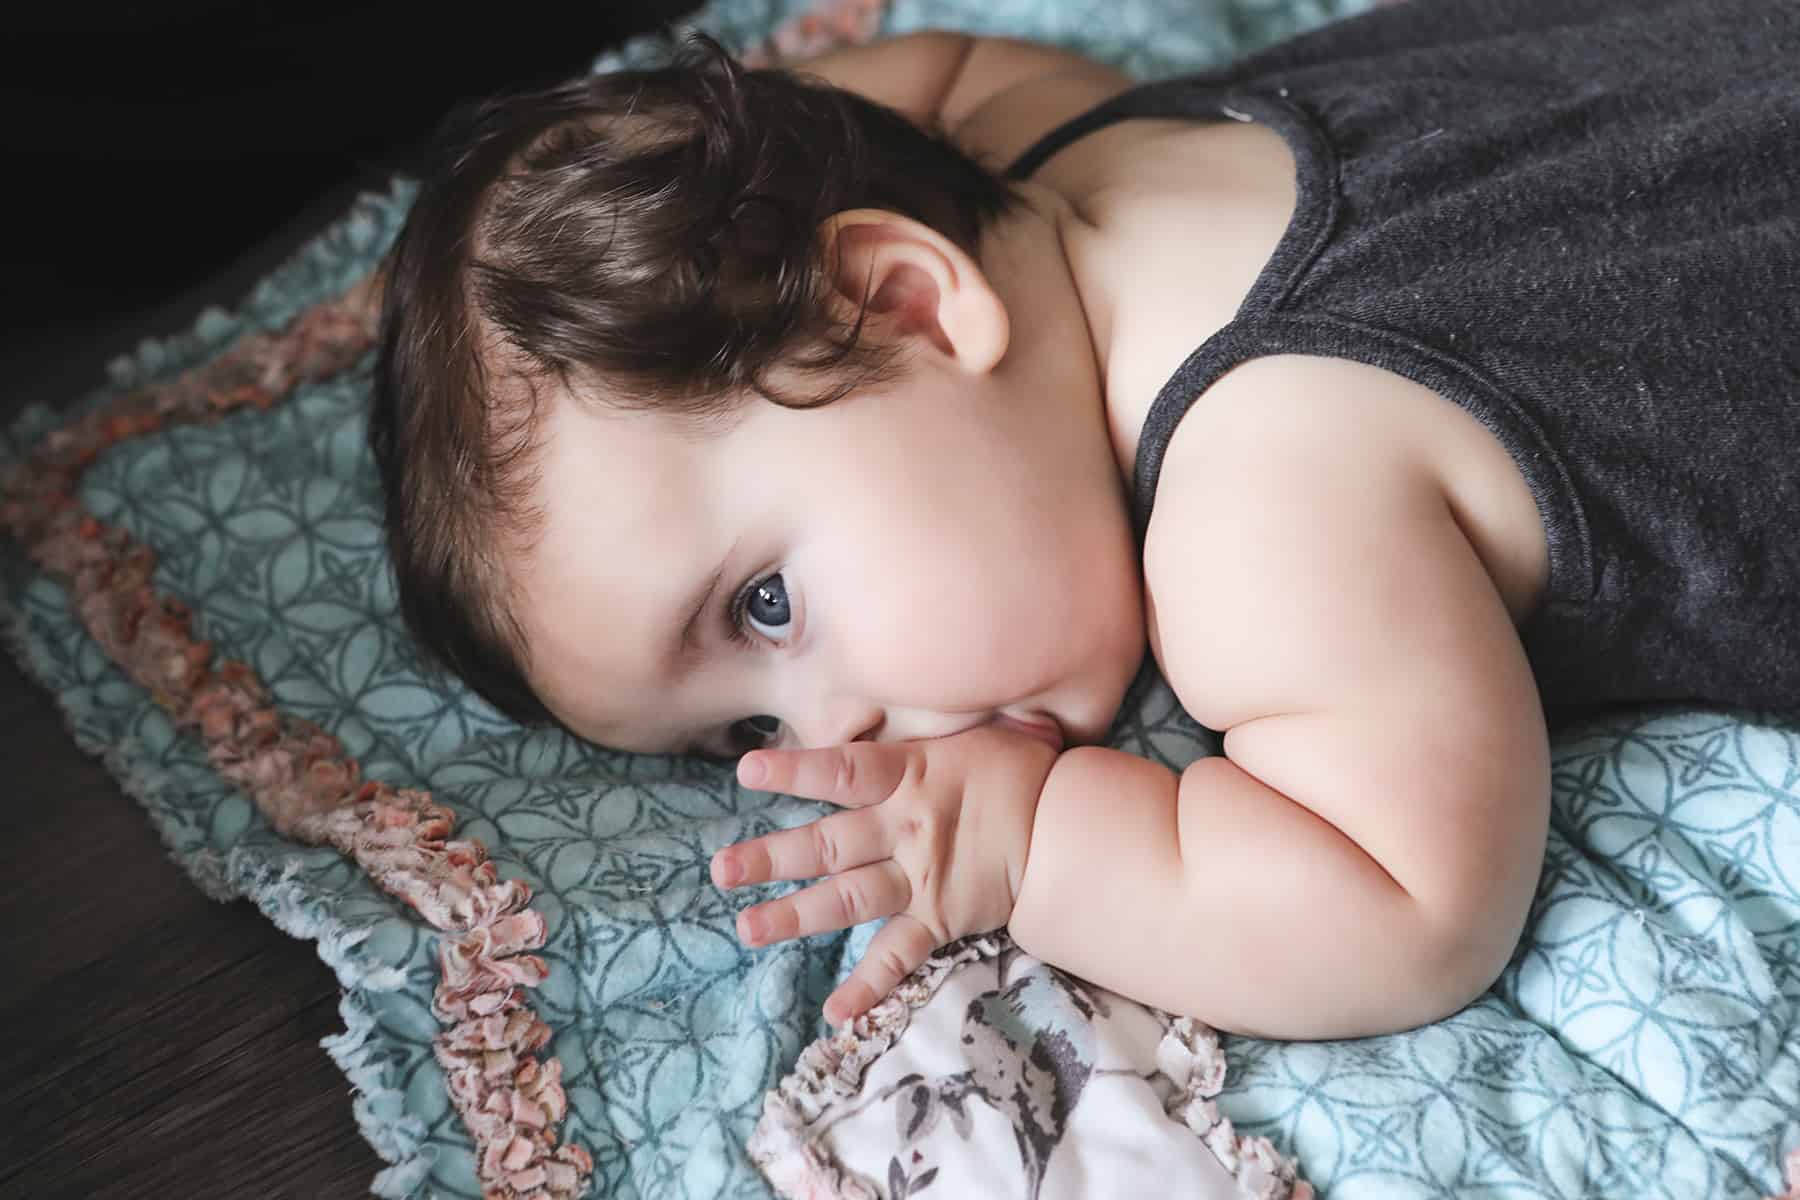 baby sleeping on tummy with face in mattress